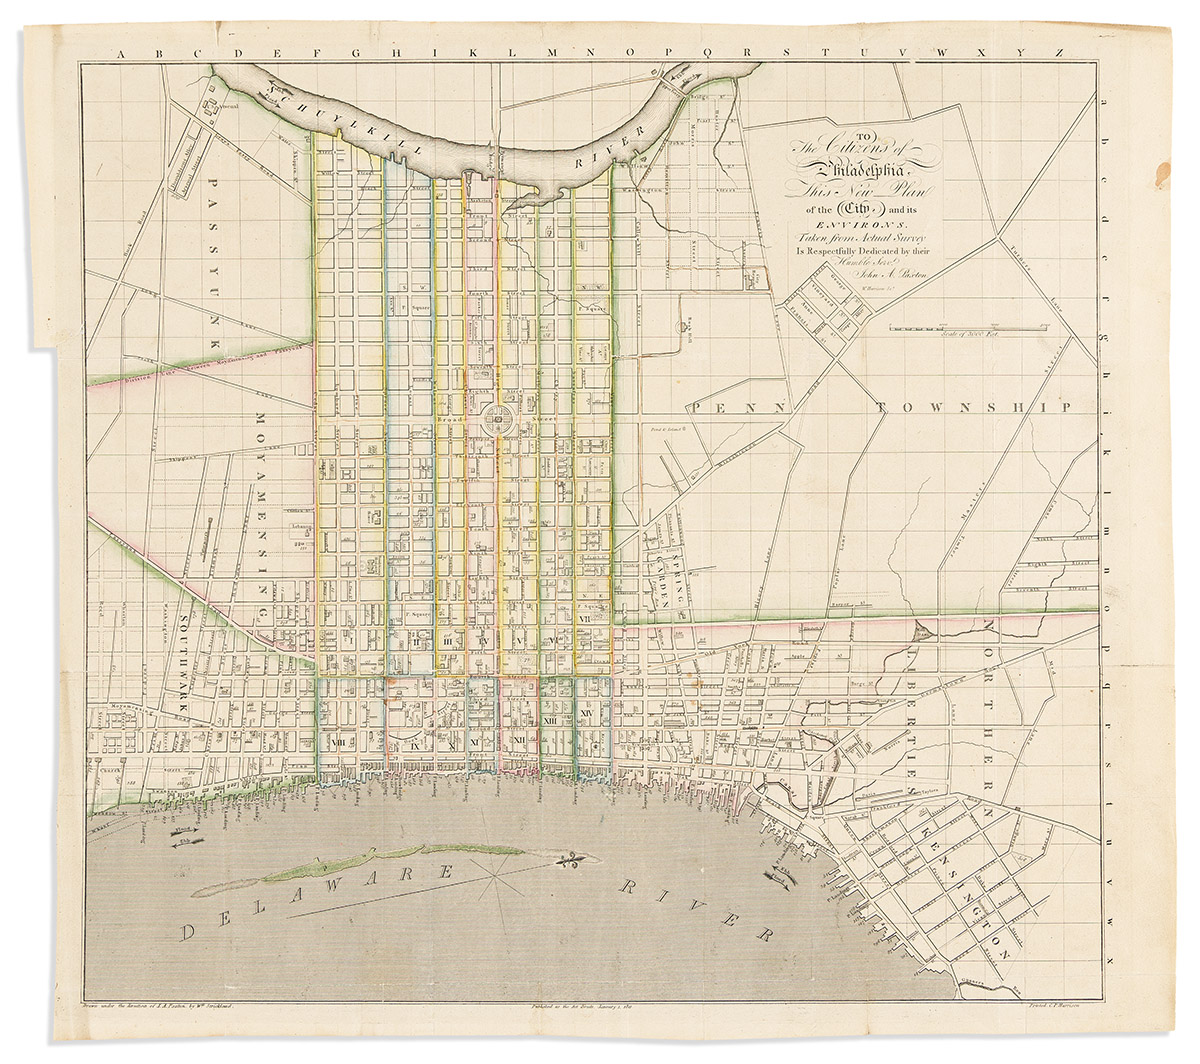 (PHILADELPHIA.) John A. Paxton. To the Citizens of Philadelphia, This New Plan of the City and its Environs